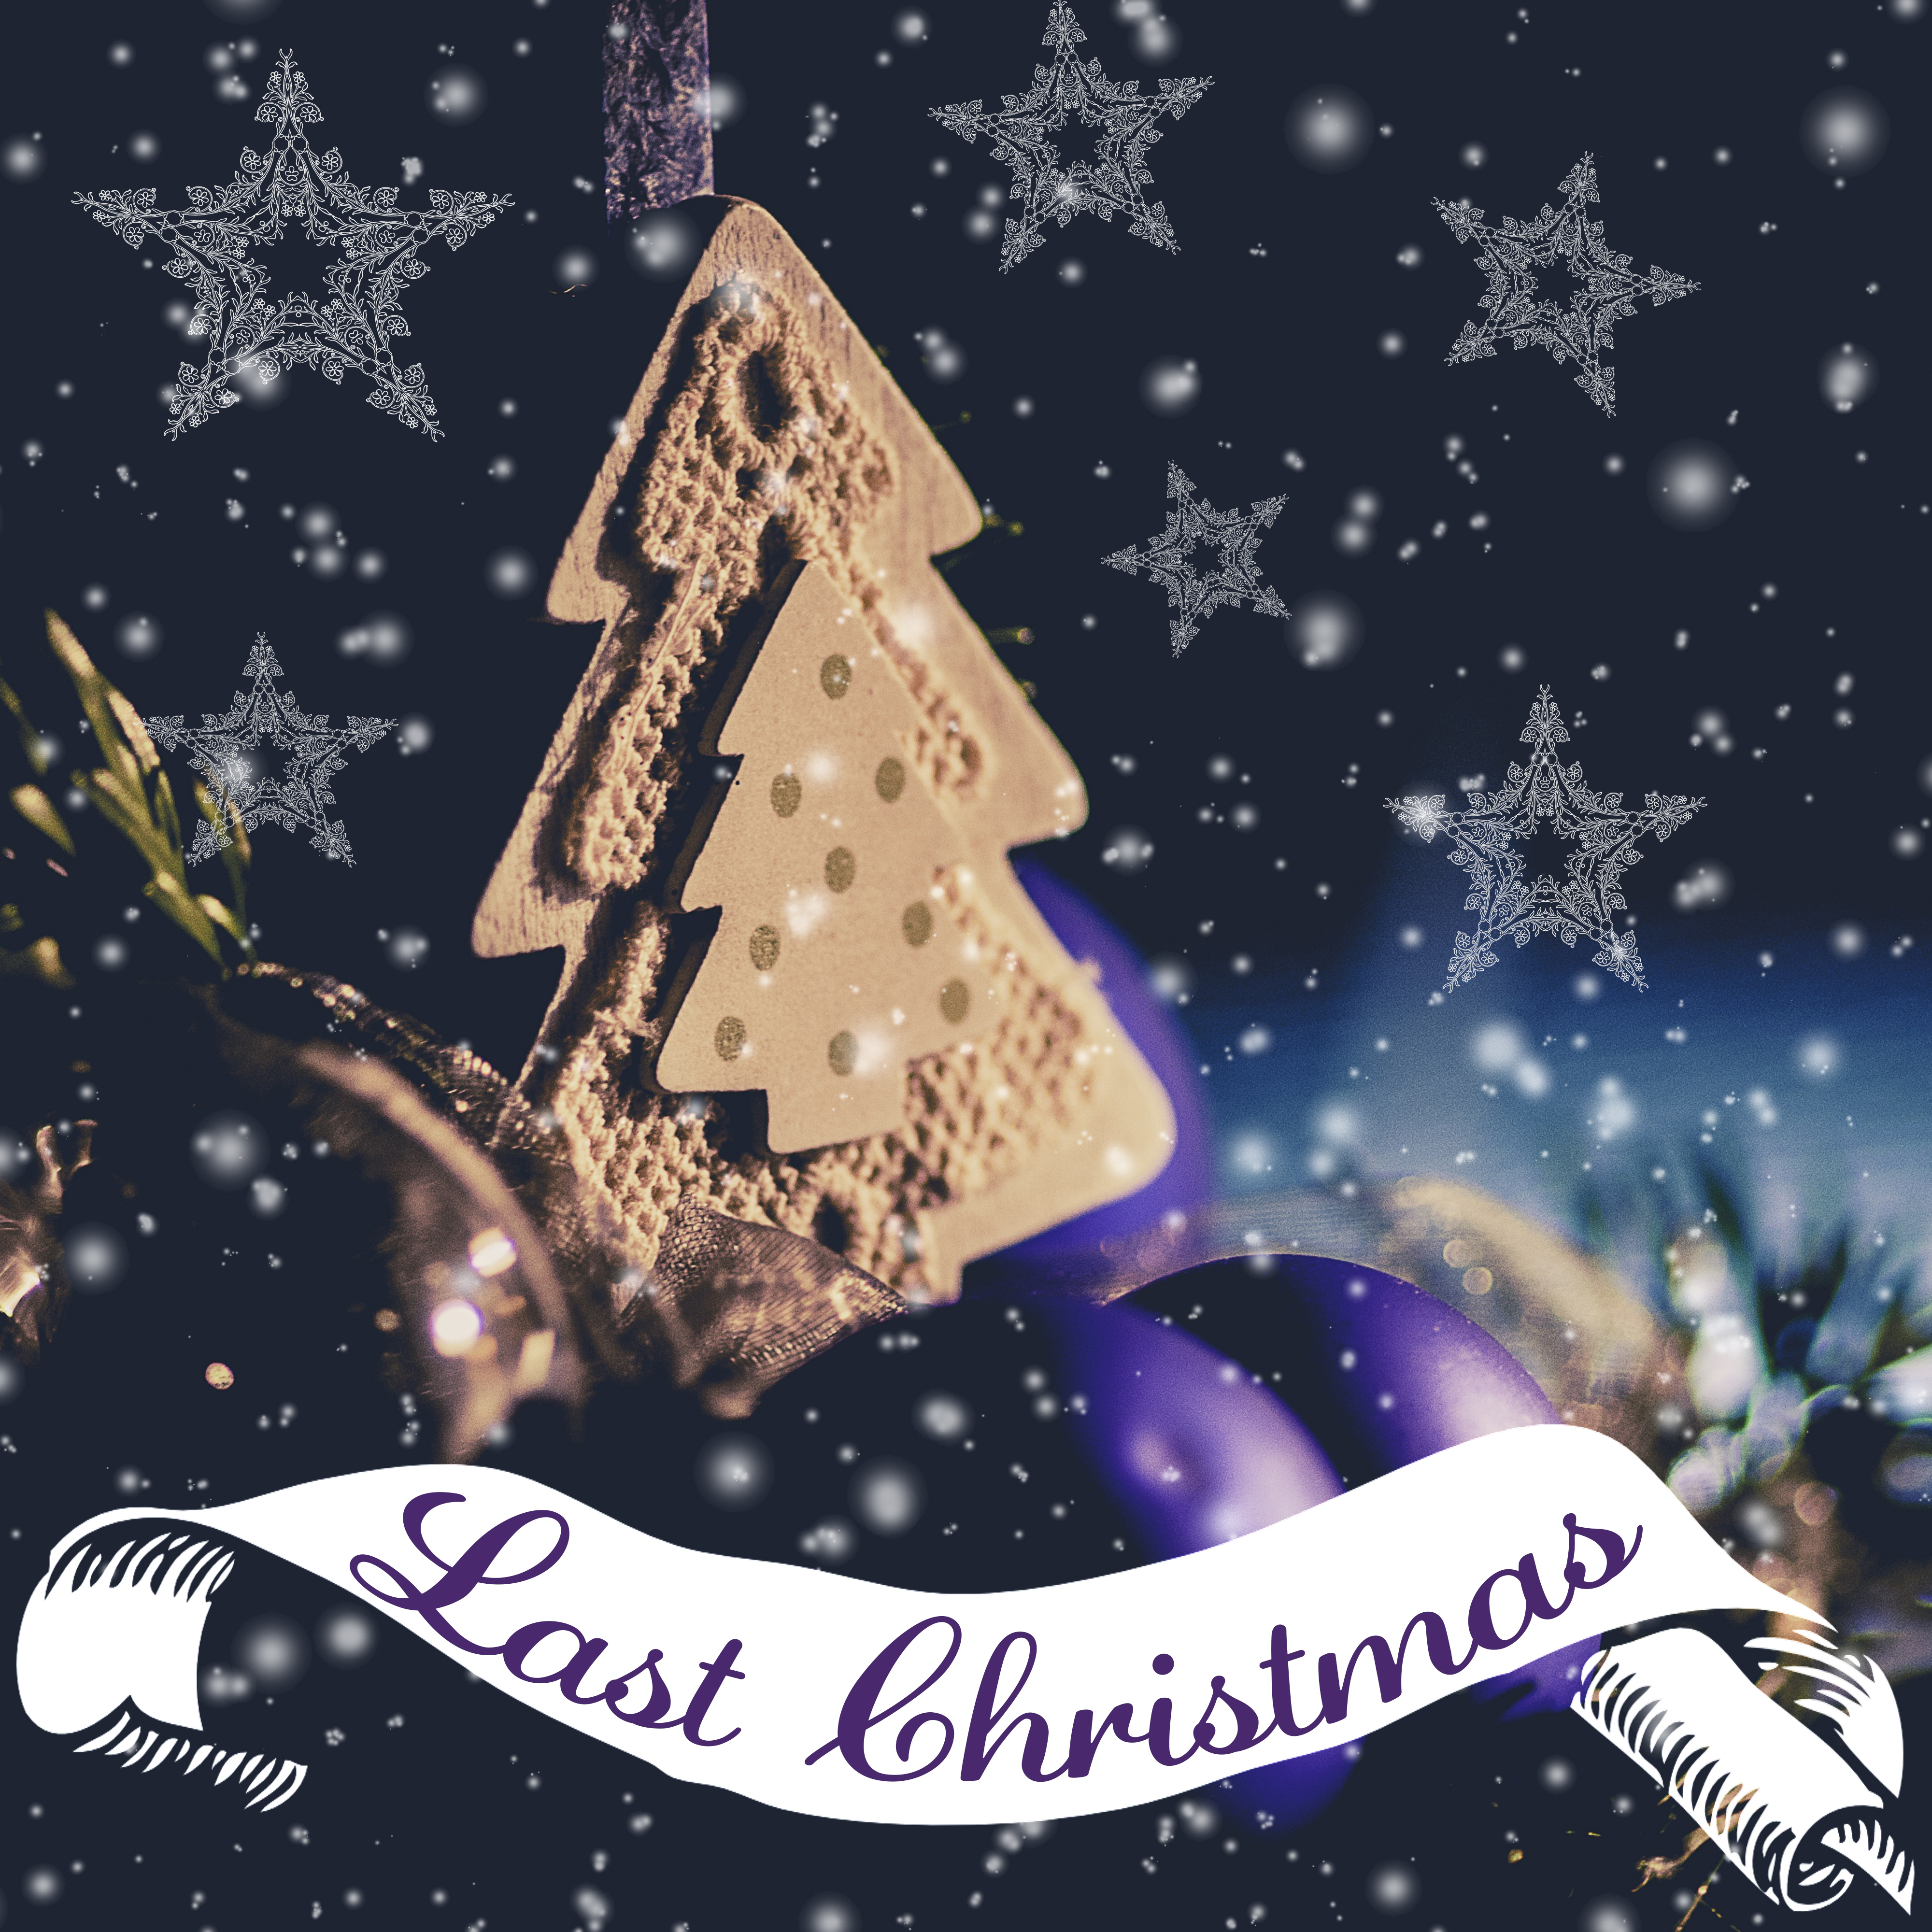 Last Christmas - Gingerbread House, White Fantasy, Merry Christmas, Star of the Christmas Tree, Glowing Snowflakes, Glow Ornaments, Santa Claus in a Sleigh, Best Rudolf, Ringing Bells, Kisses under Mistletoe